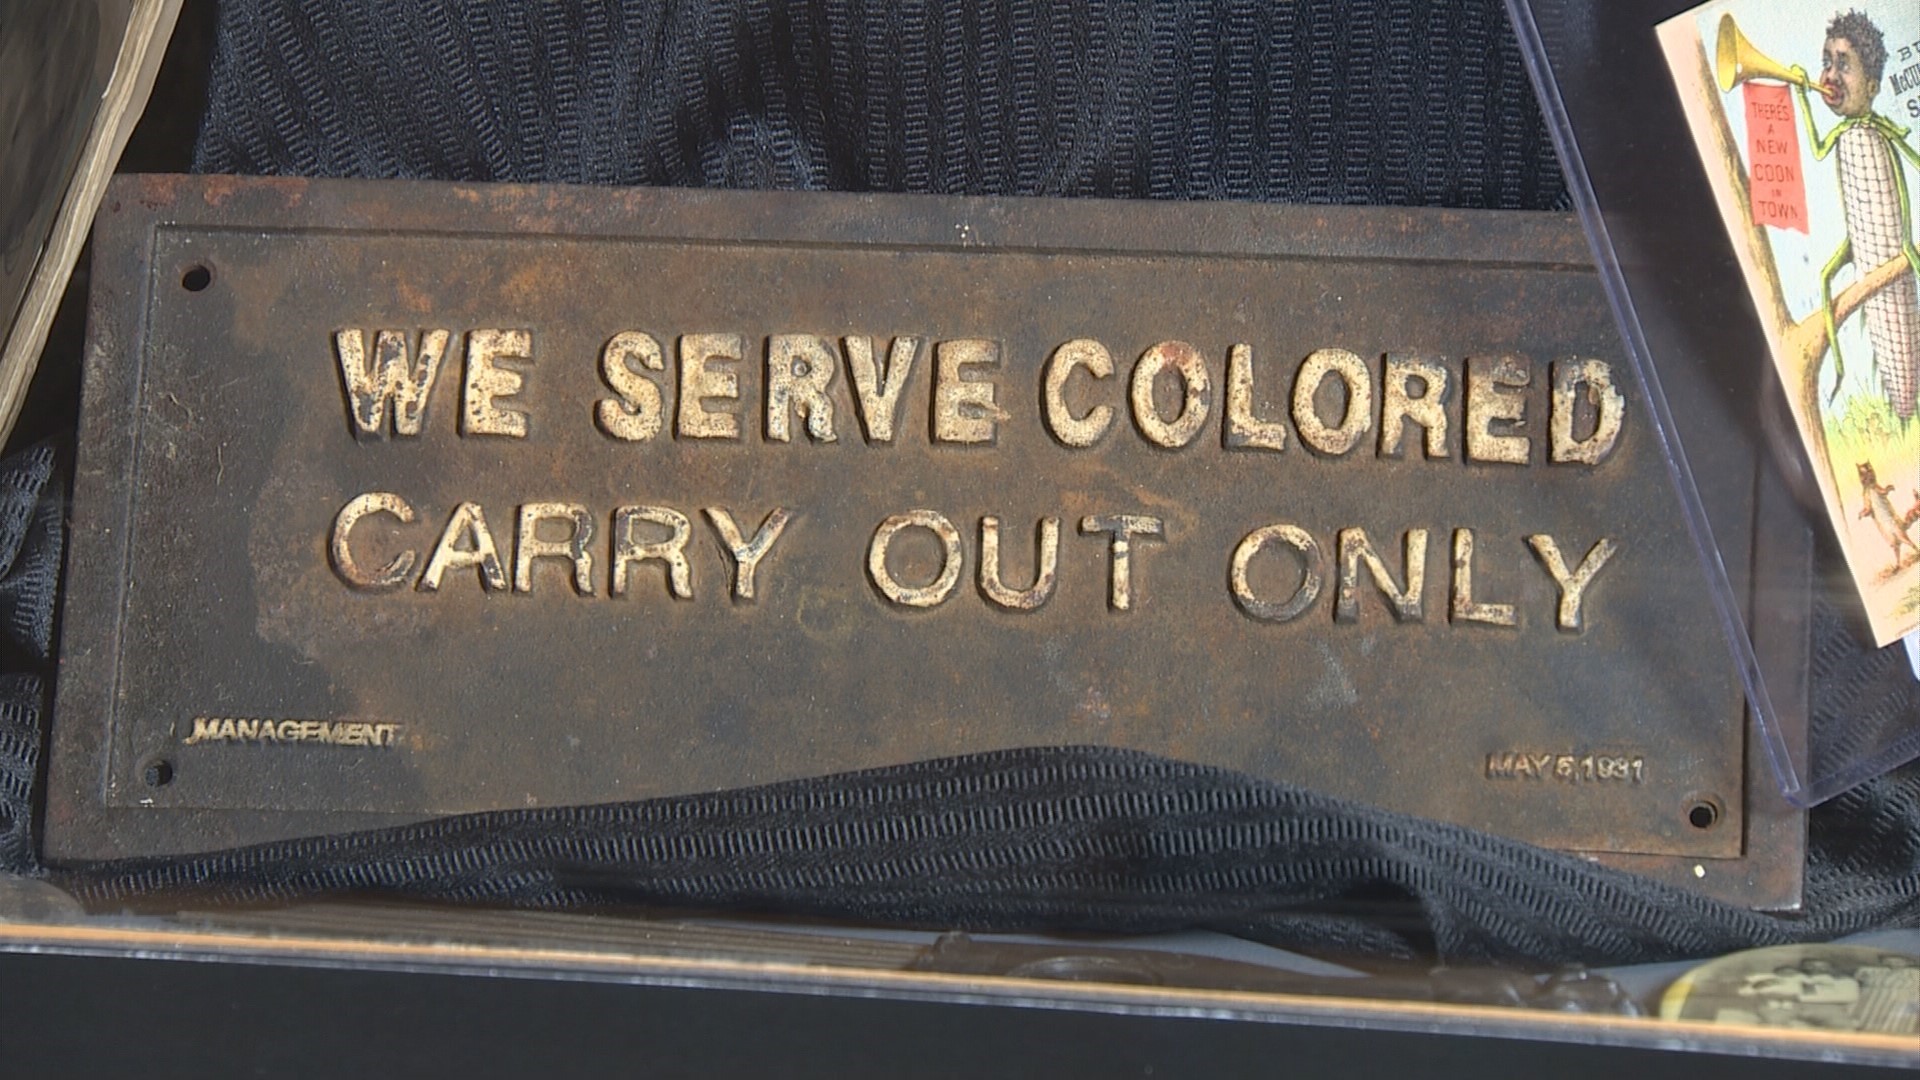 The Kitsap History Museum showcases controversial pieces of Black Americana.